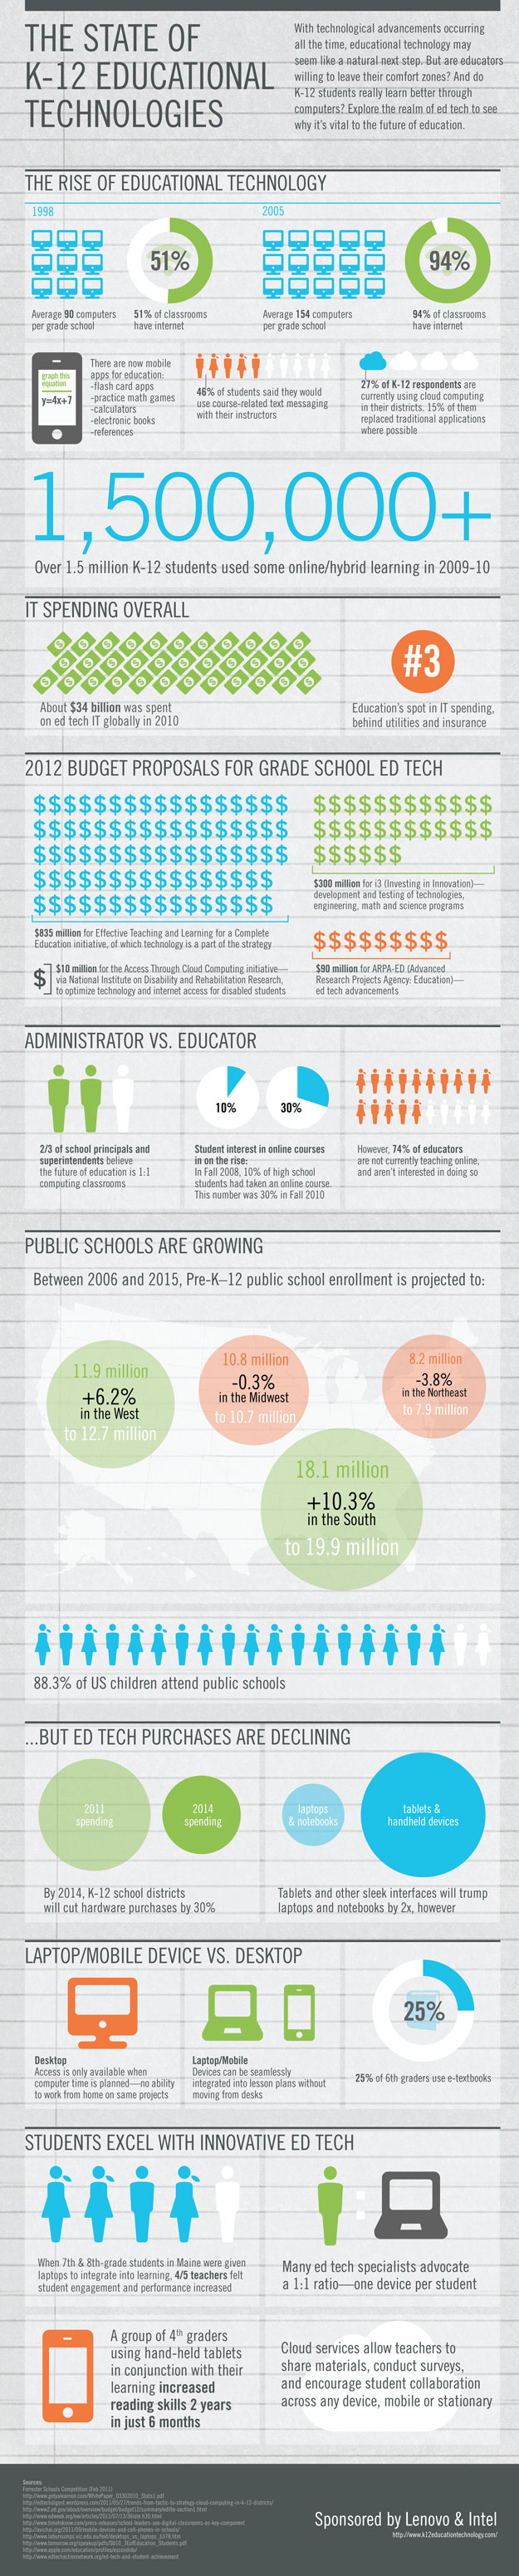 rise-of-education-technology-infographic.jpg